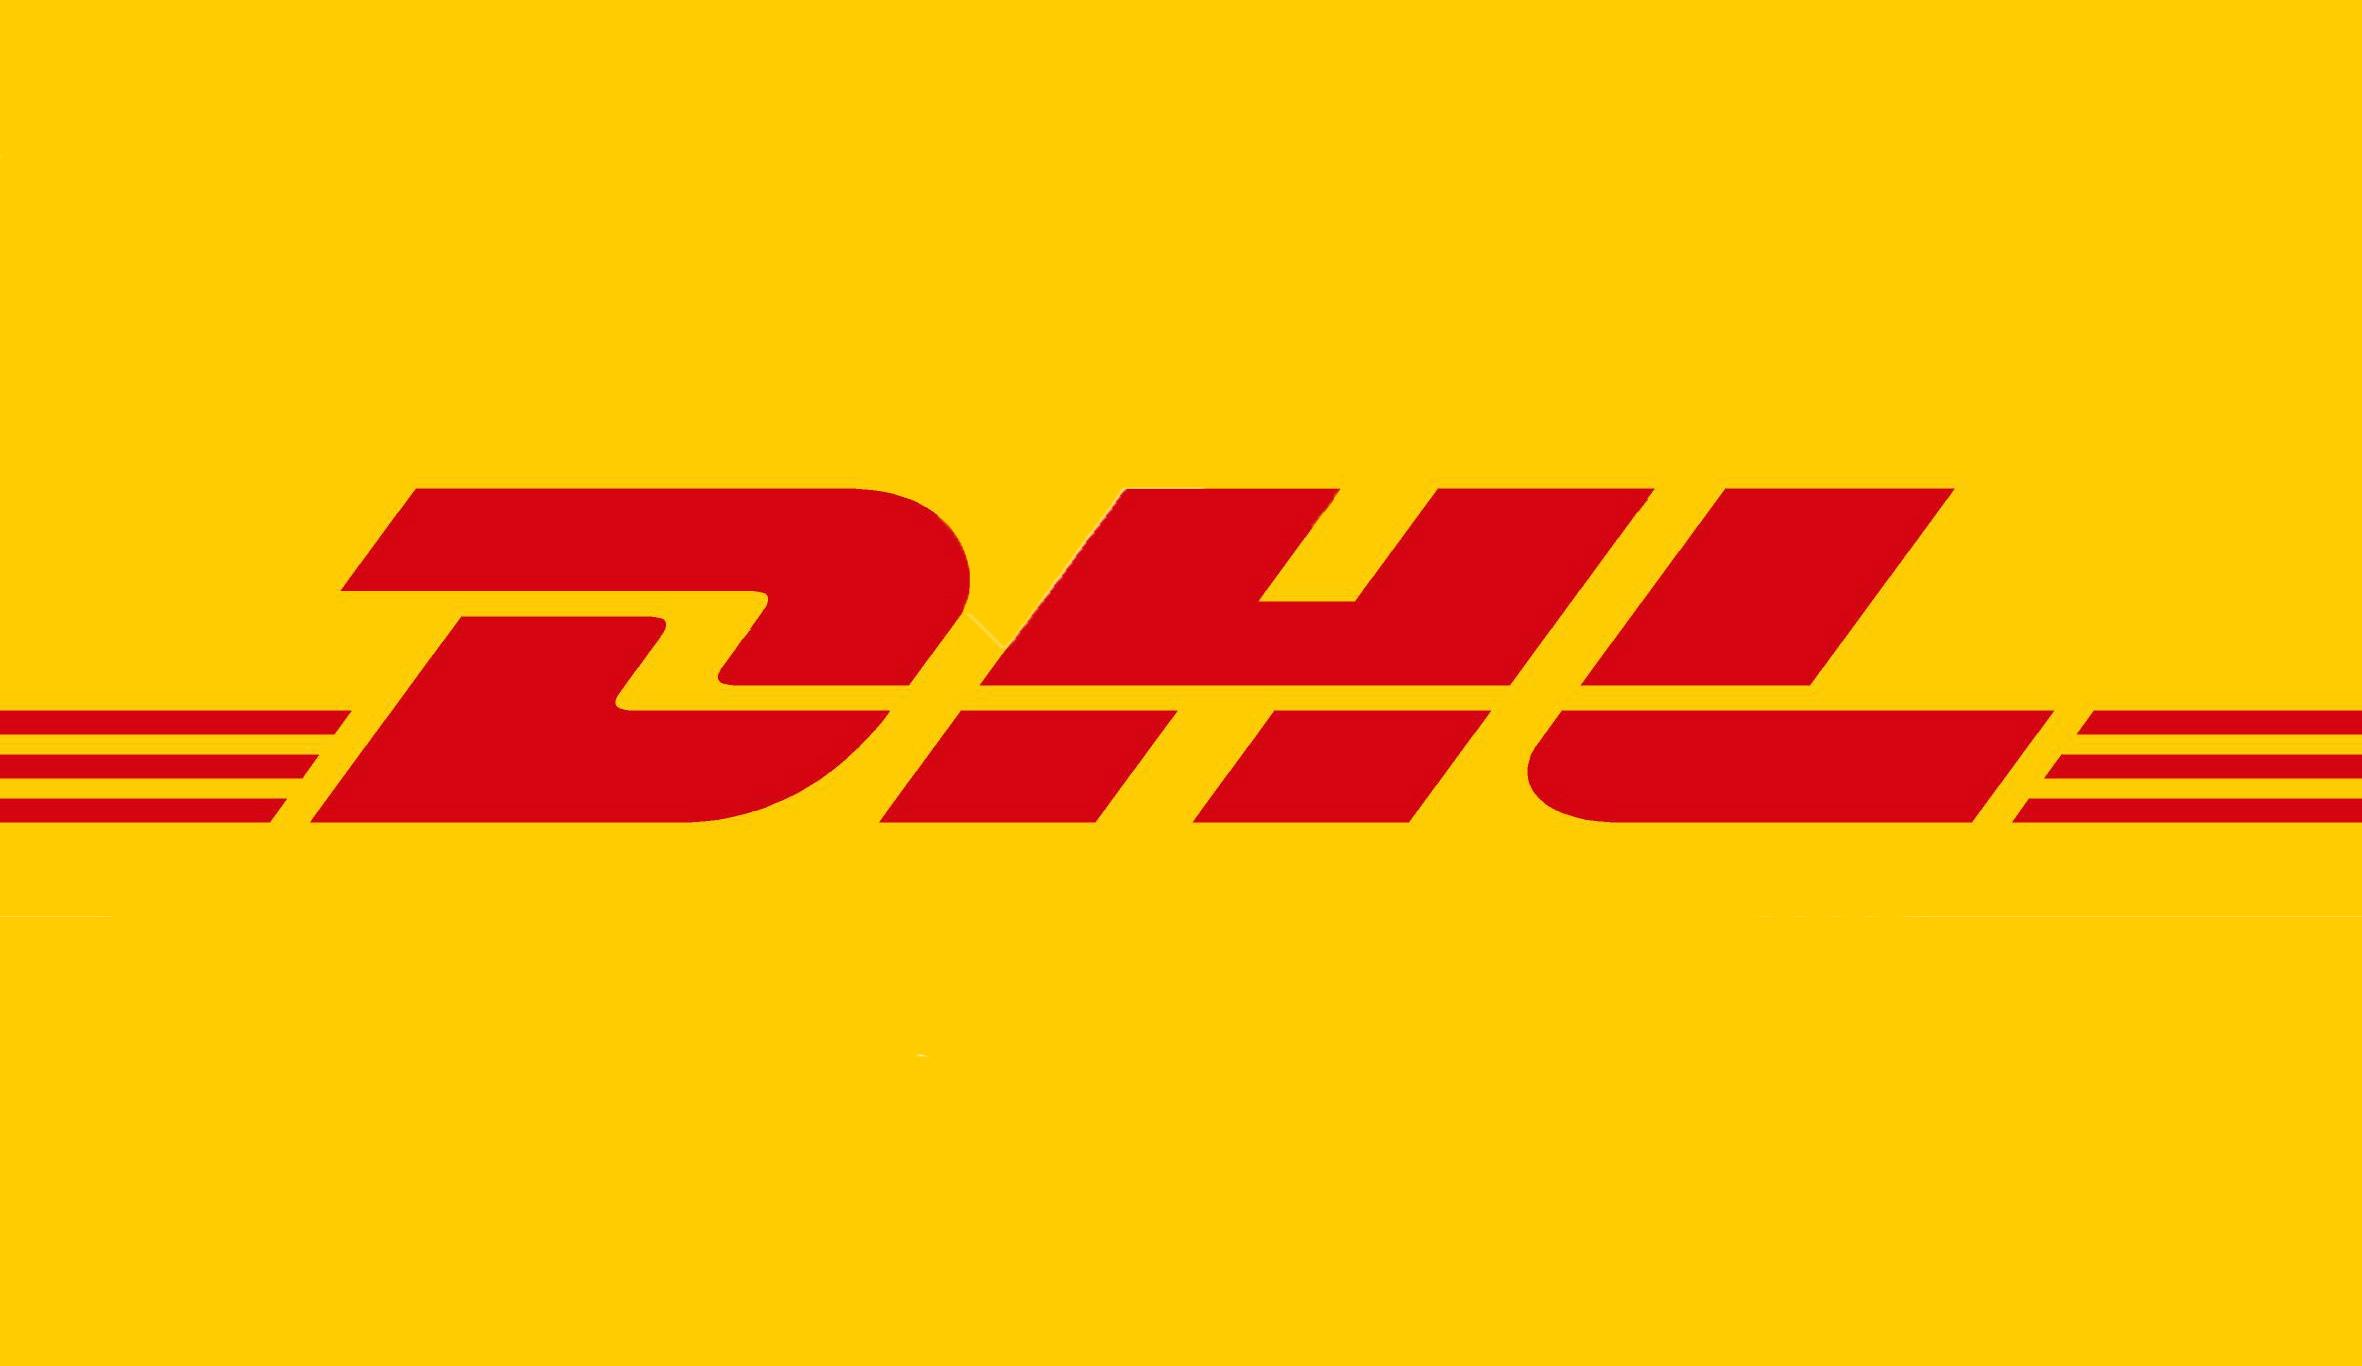 Download Wallpaper Dhl Courier Service